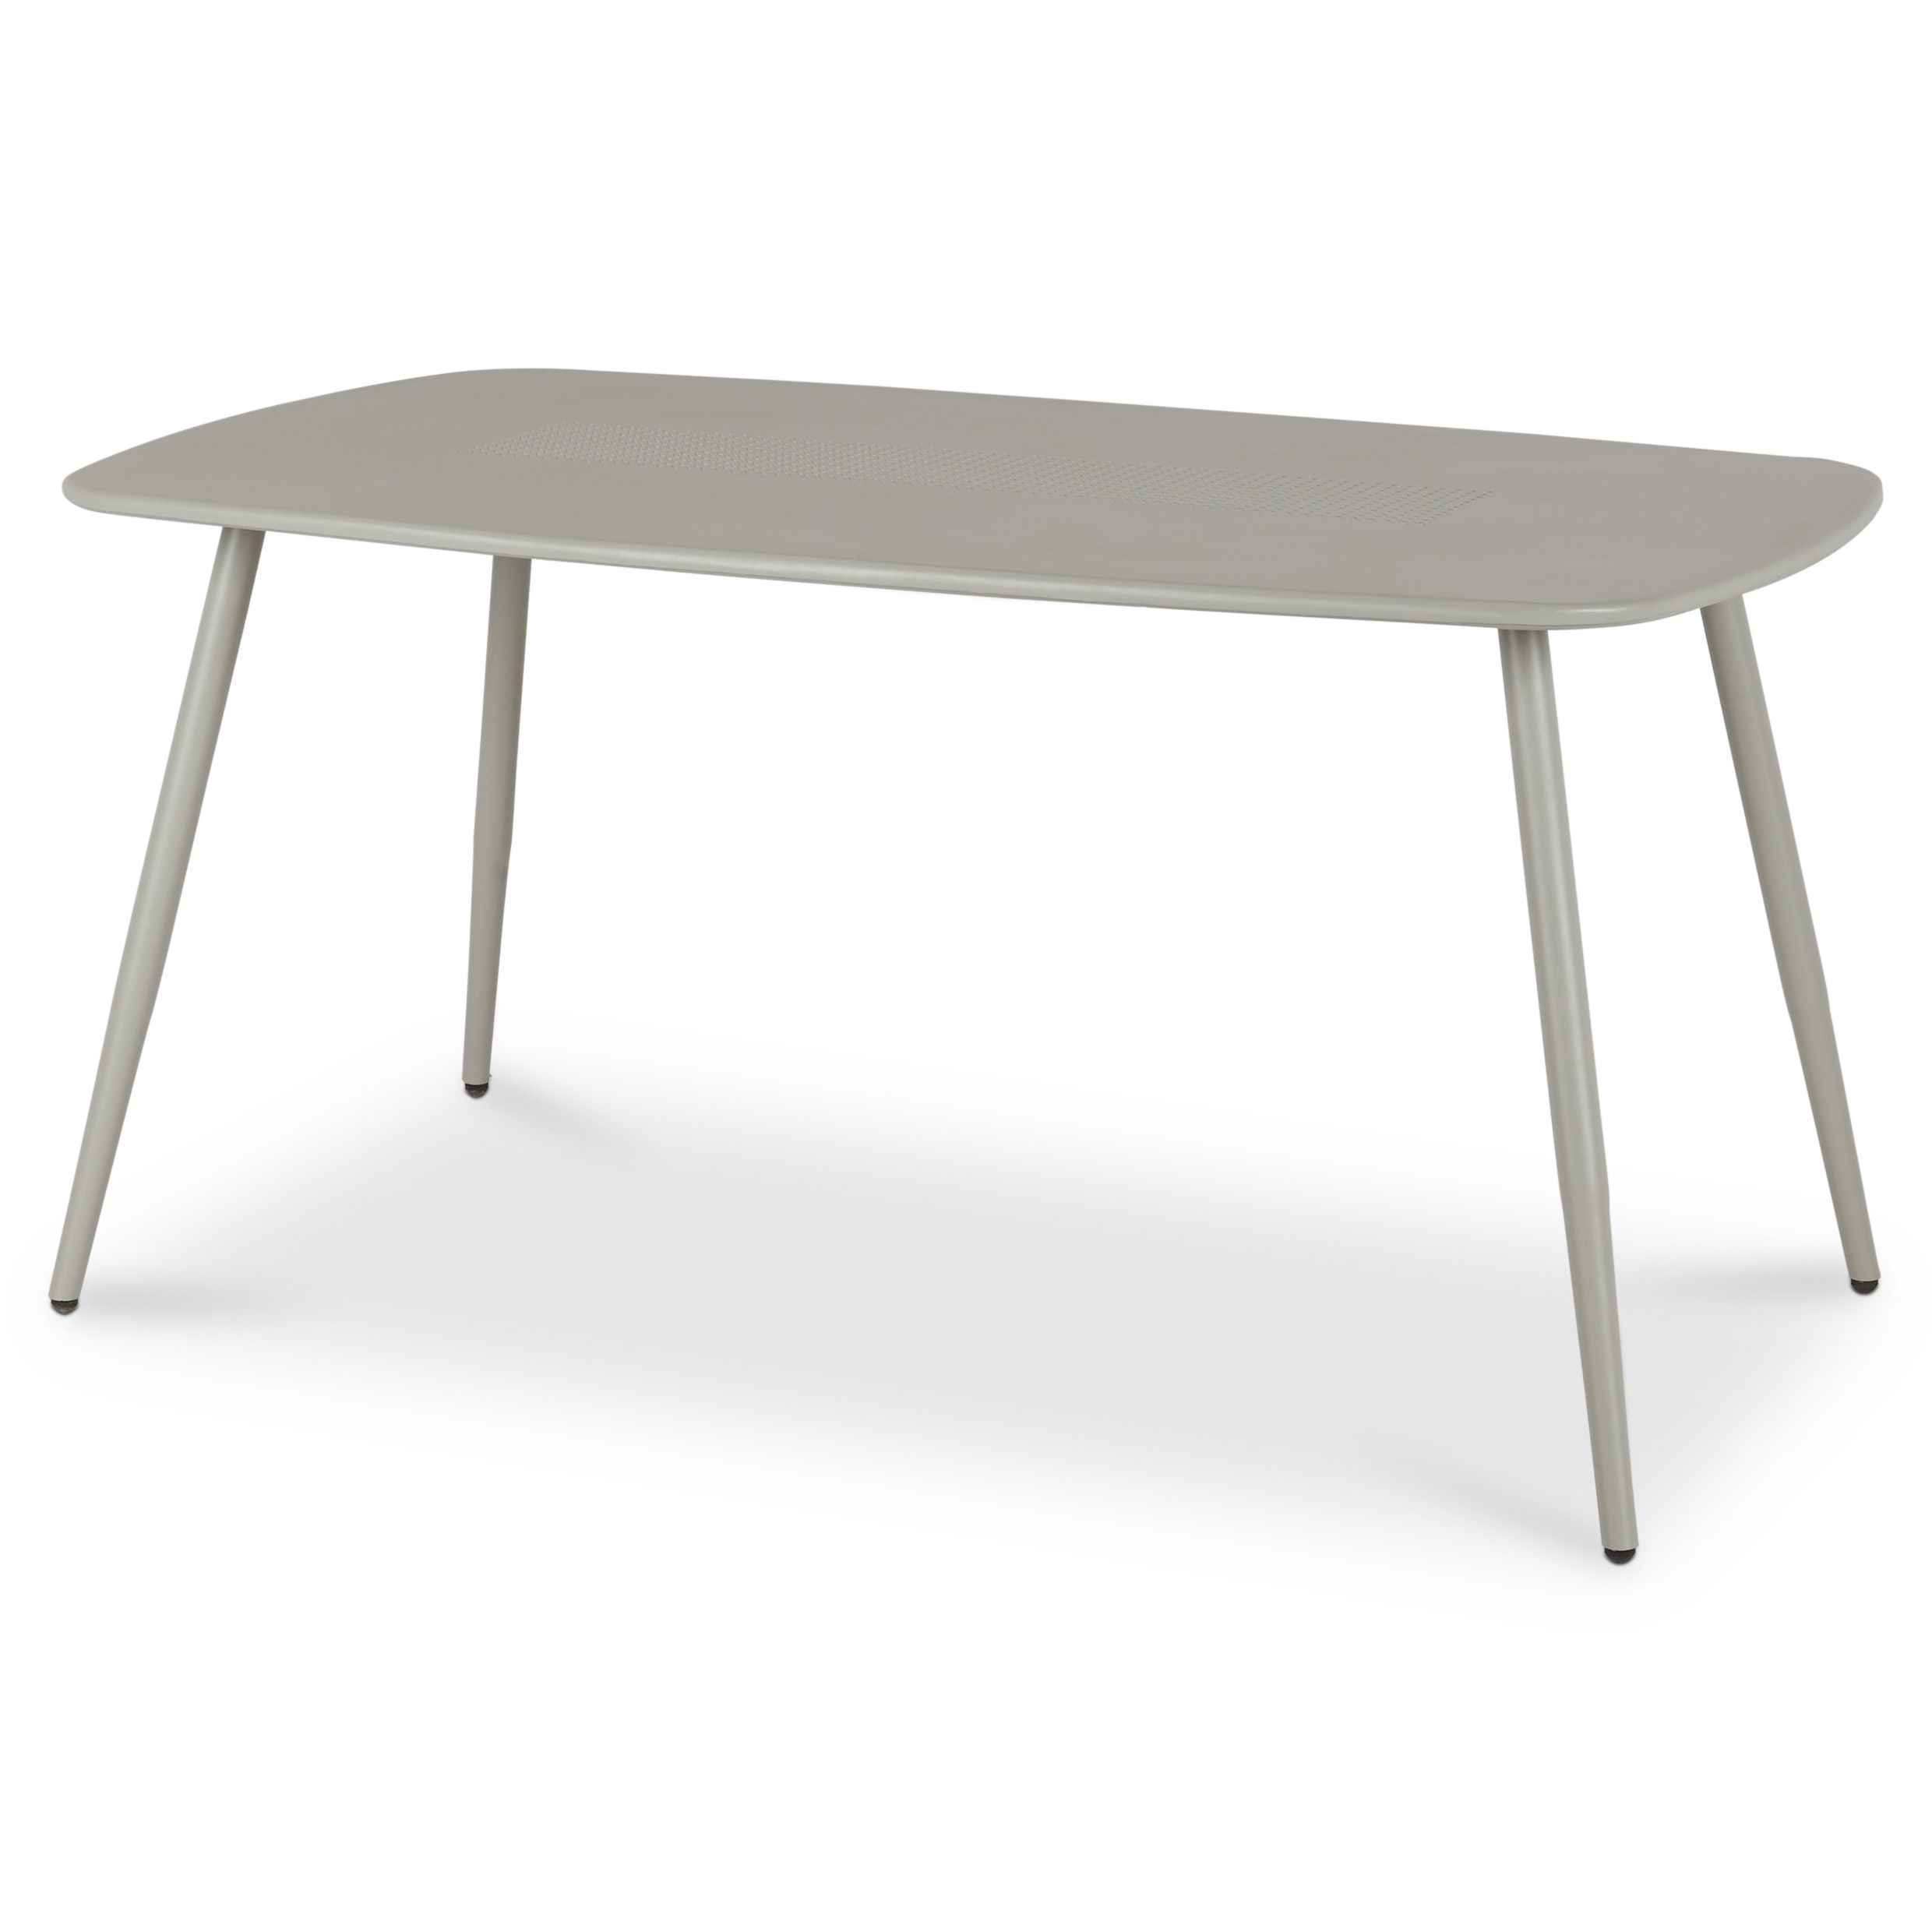 Blooma Dorsey Metal Table